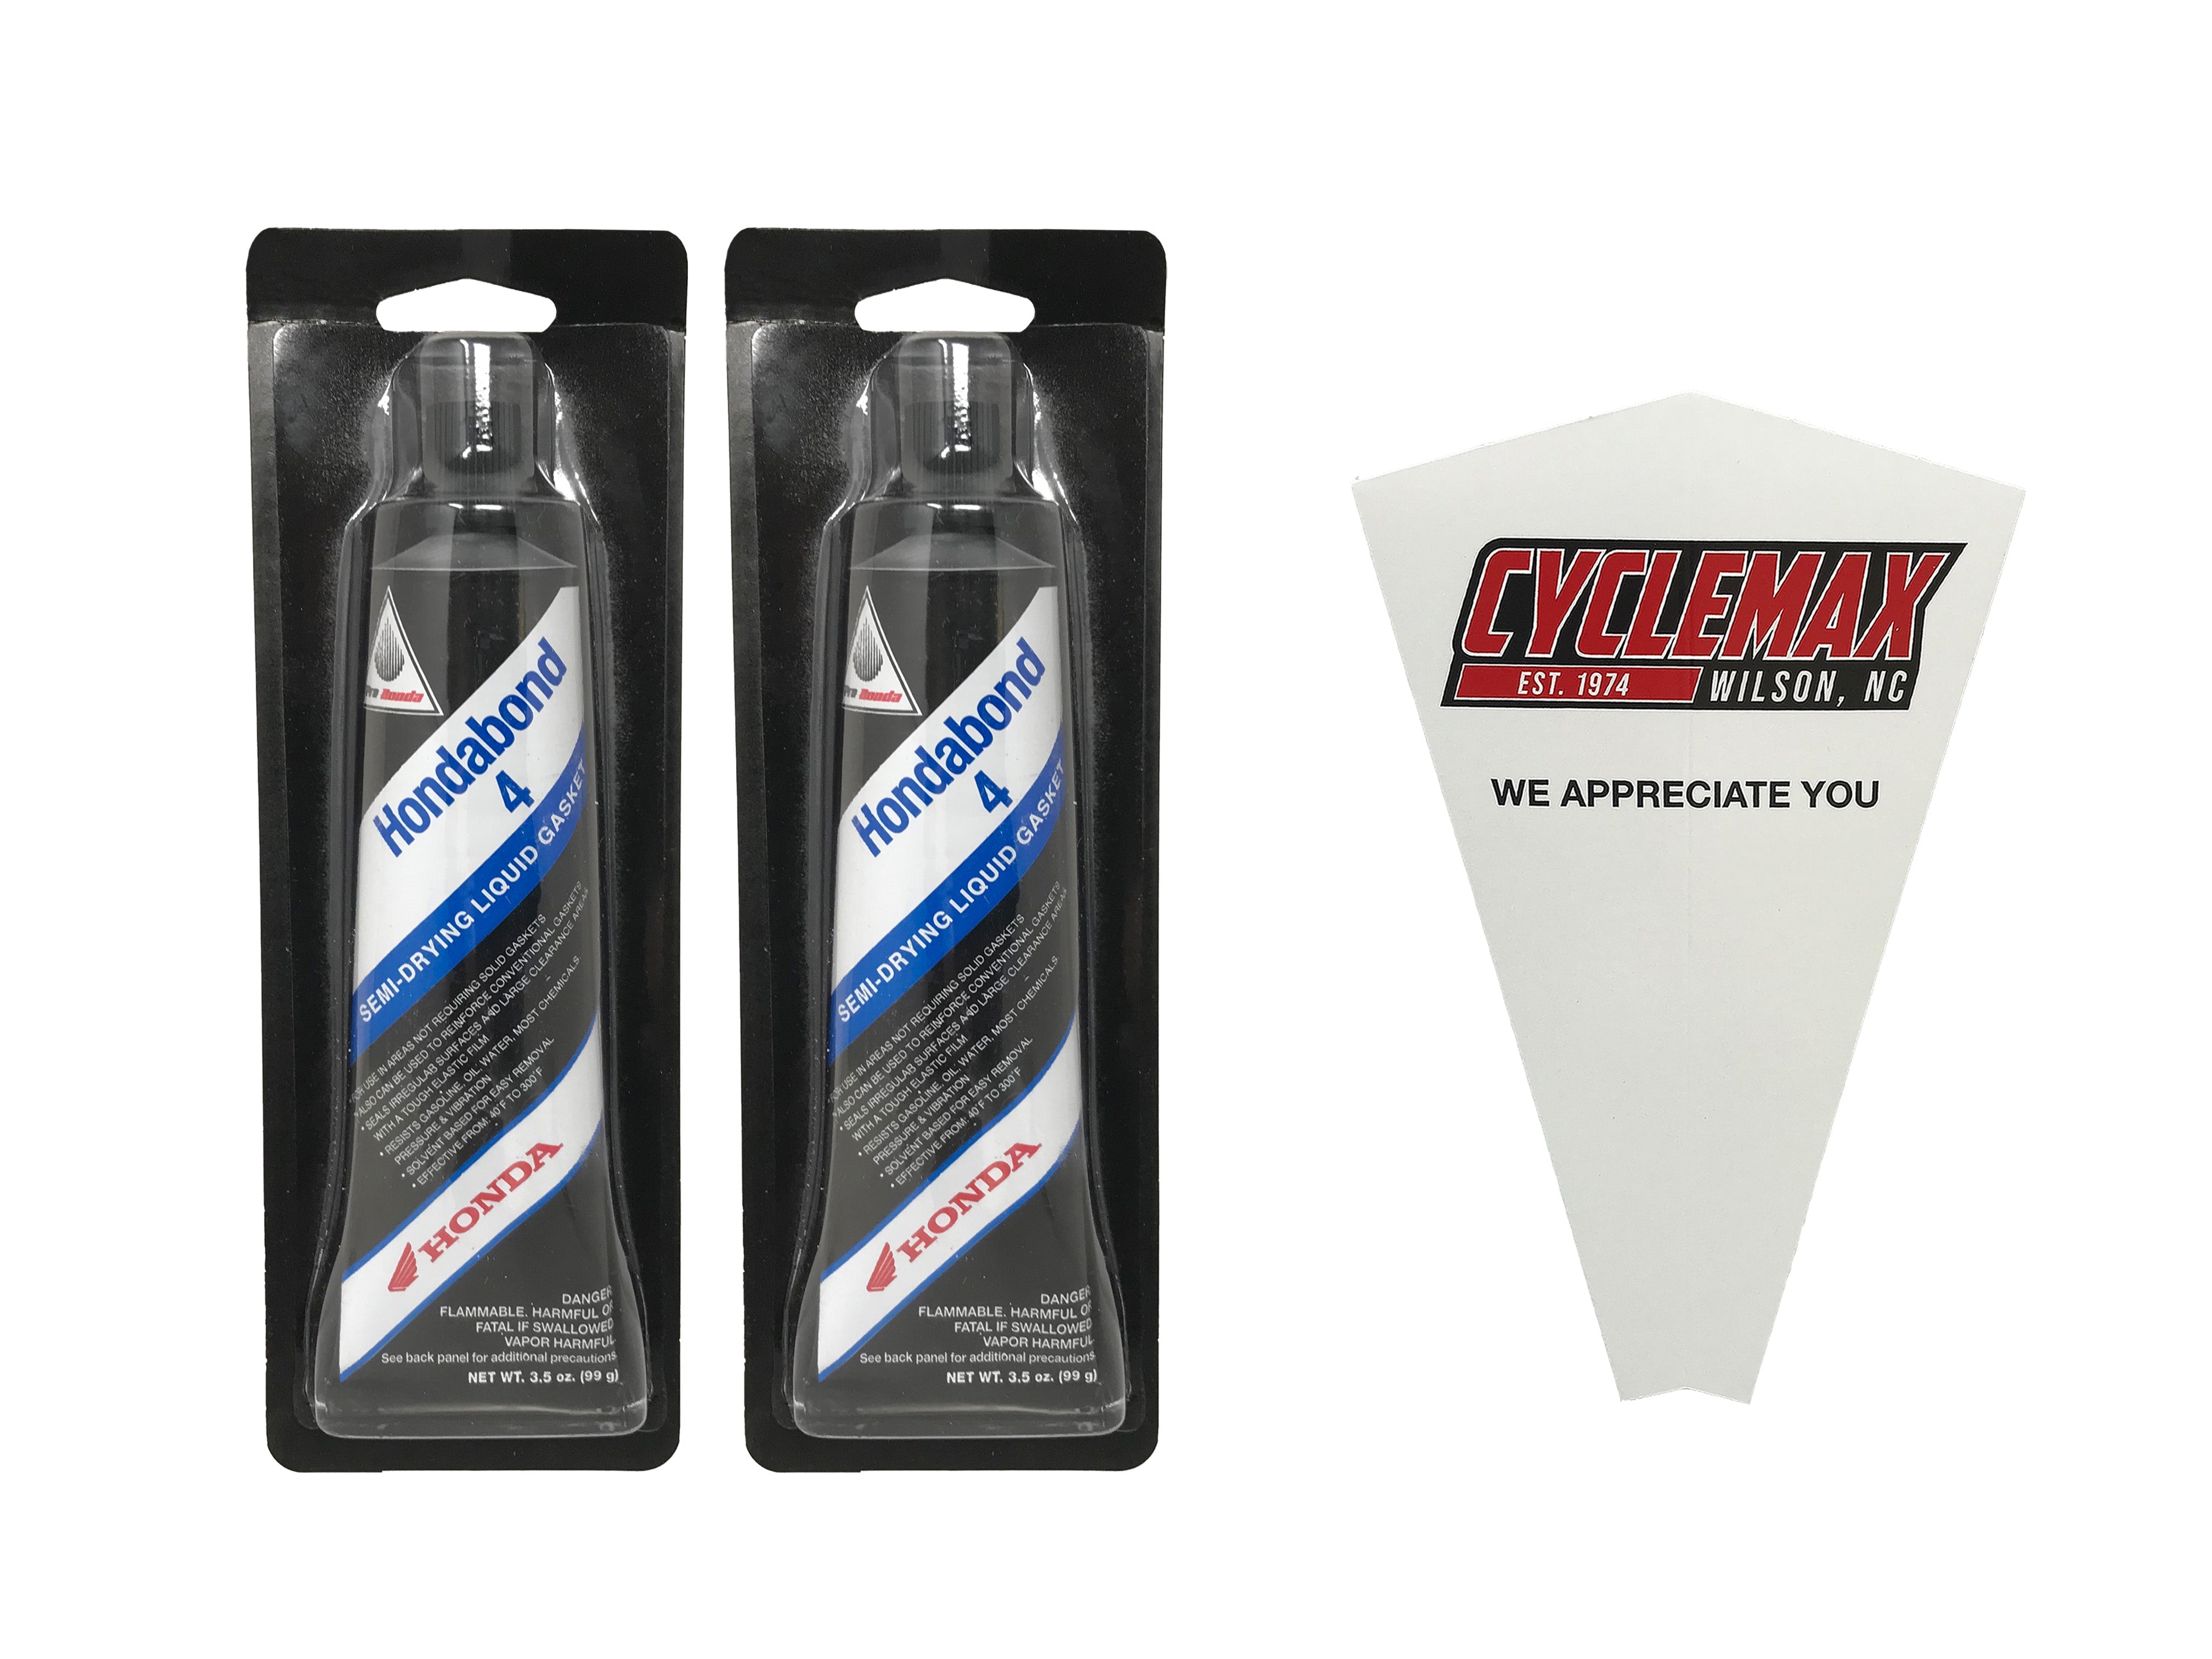 Cyclemax Two Pack for Honda Hondabond 4 Semi-Drying Liquid Gasket 08717-1194 Contains Two 3.5oz Tubes and a Funnel